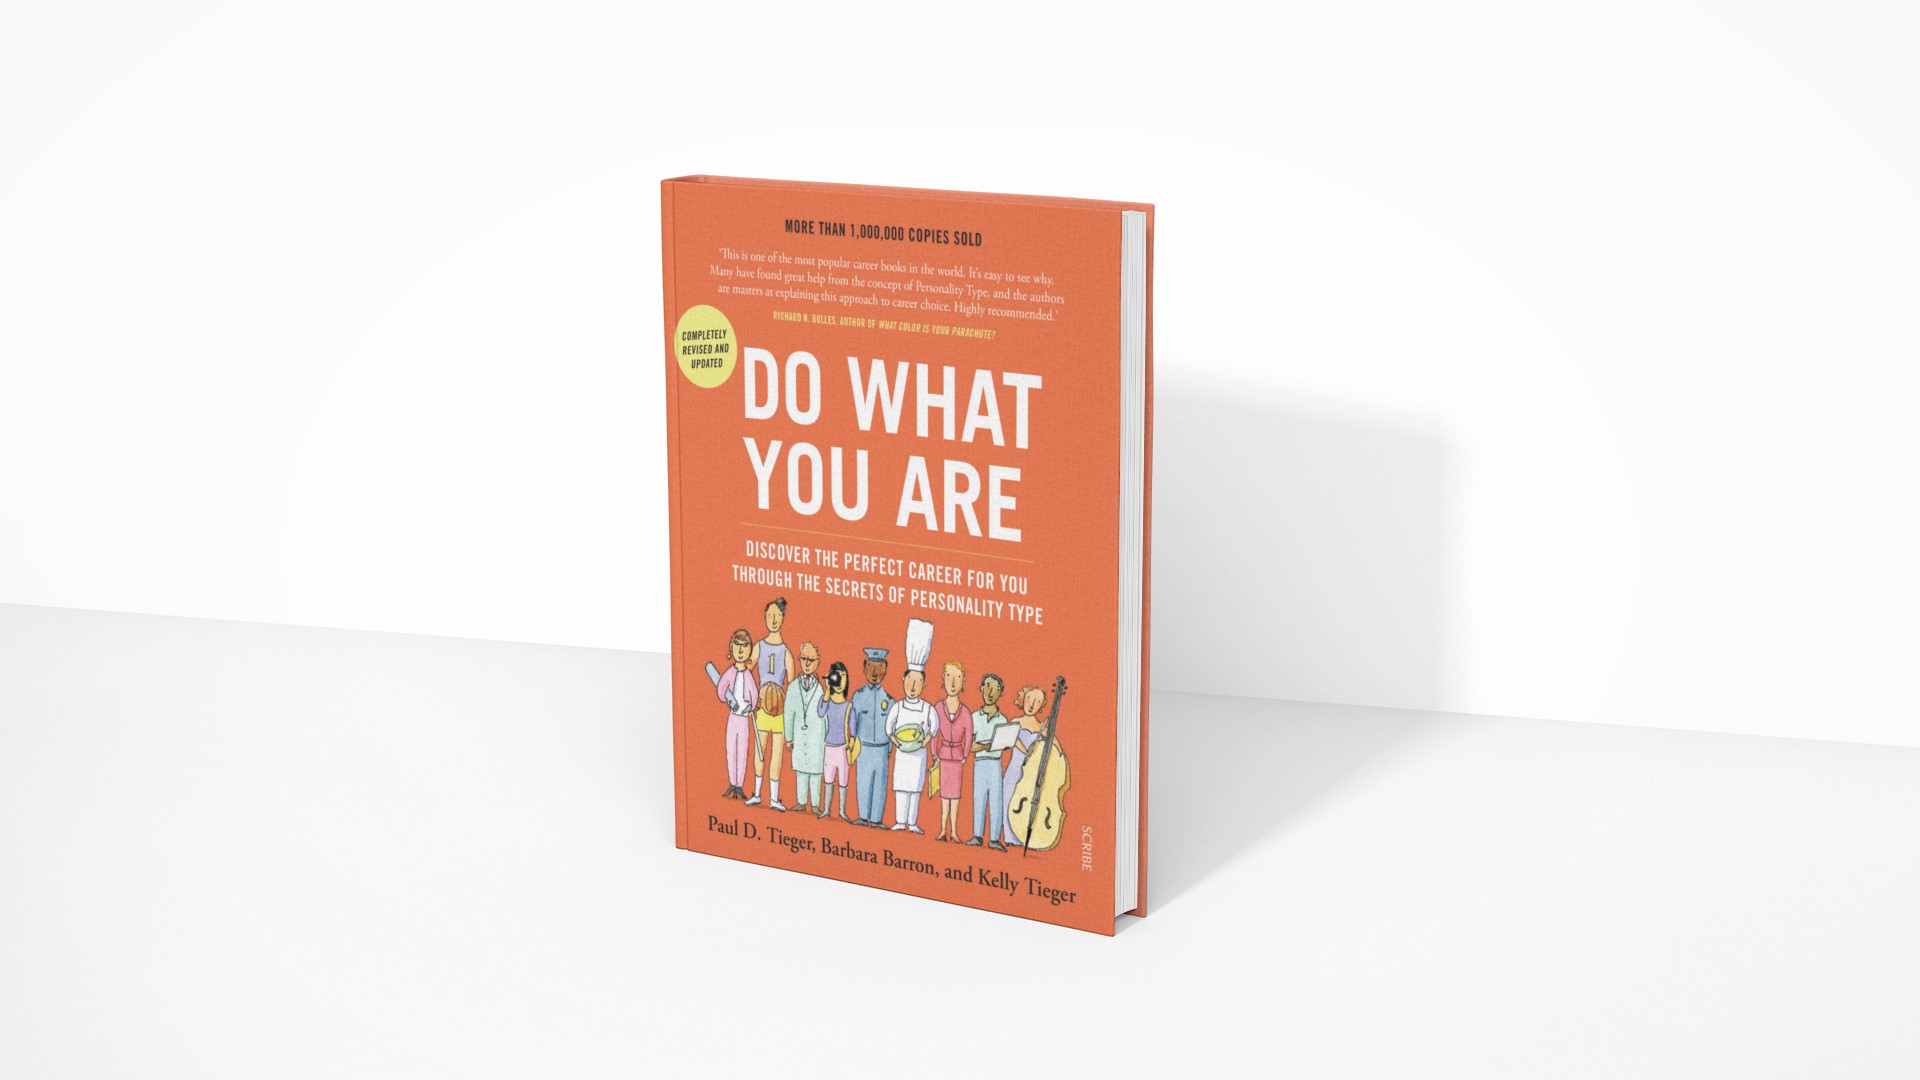 Do What You Are - Paul D. Tieger